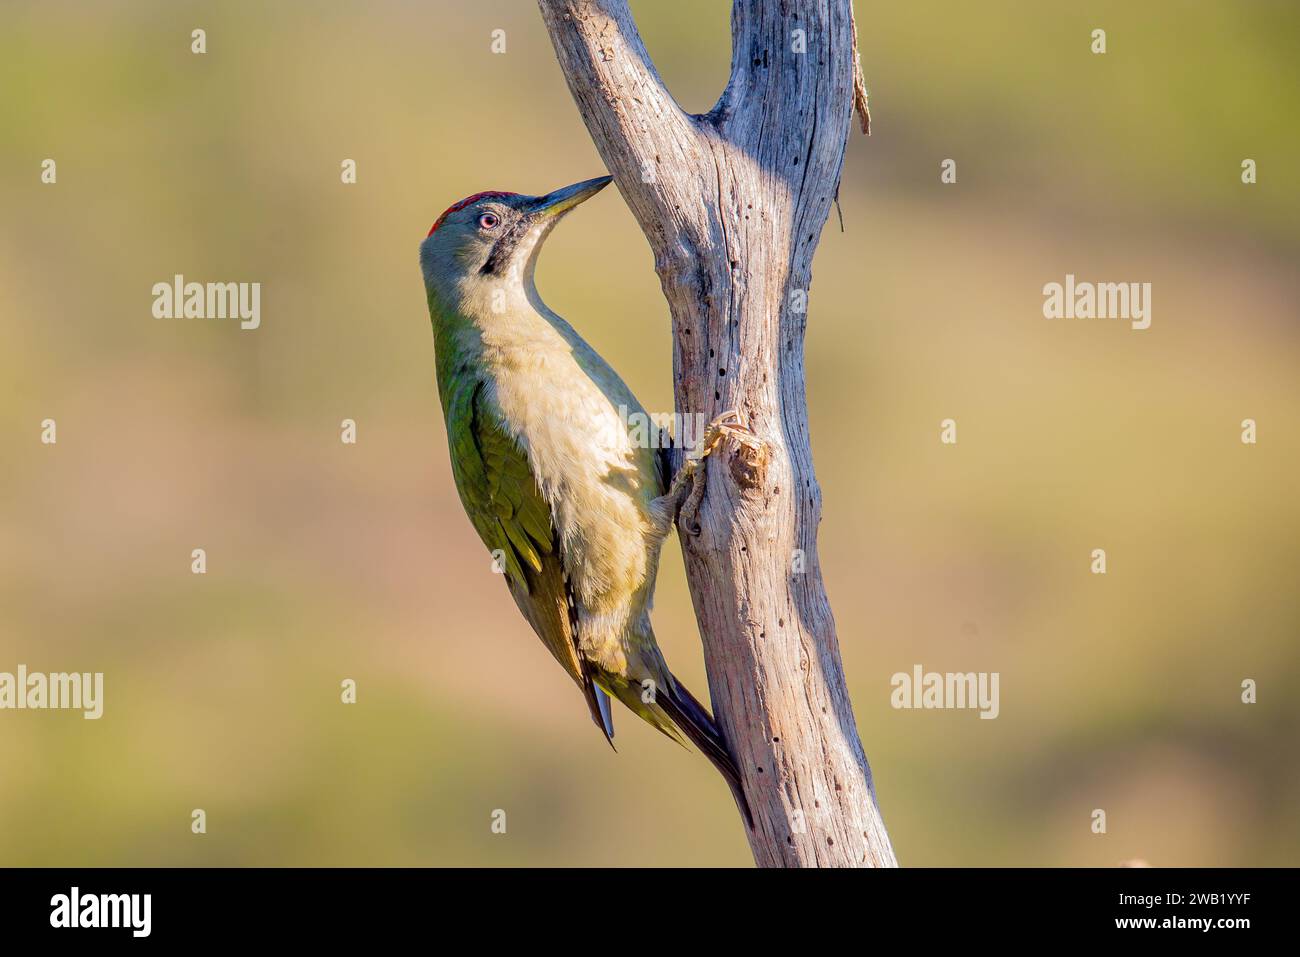 A Iberian green woodpecker perched on a feeder, sipping nectar from the reservoir Stock Photo